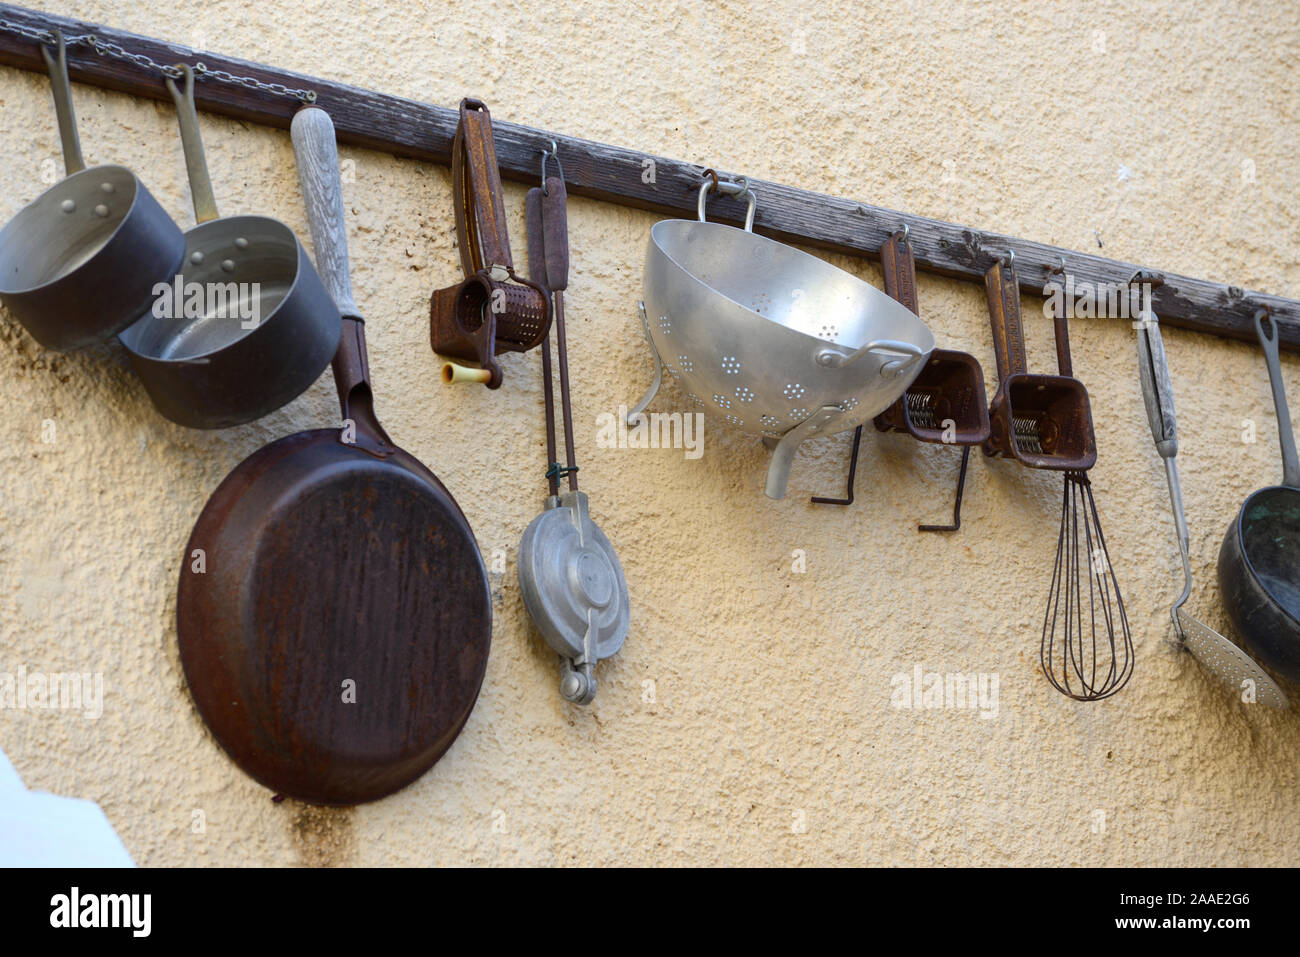 Vintage or Antique Collection of Old Kitchen Utensils Hanging on Wall Rack including Pans, Drainers & Spatulas Stock Photo